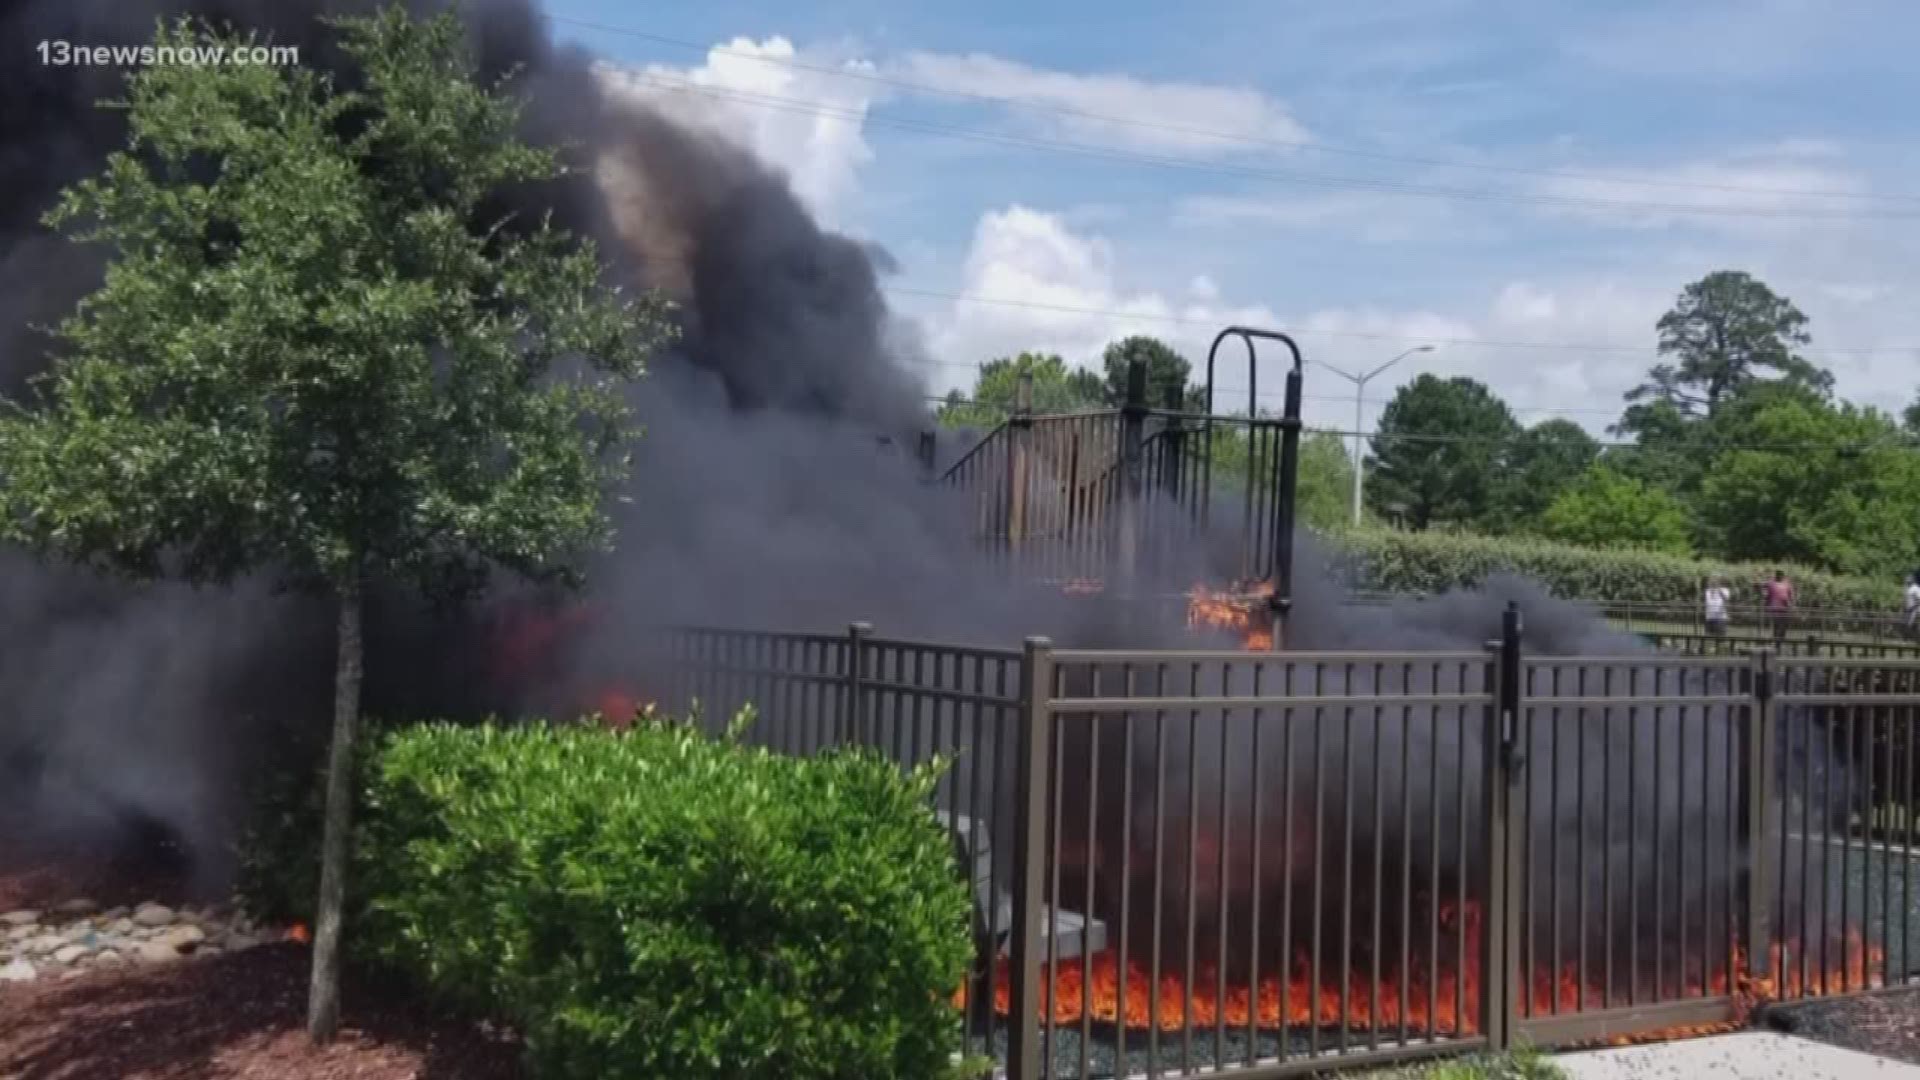 Firefighters put out the fire at an apartment complex playground in minutes, but residents who live in and around the Apartments at Spence Crossing are still fuming.